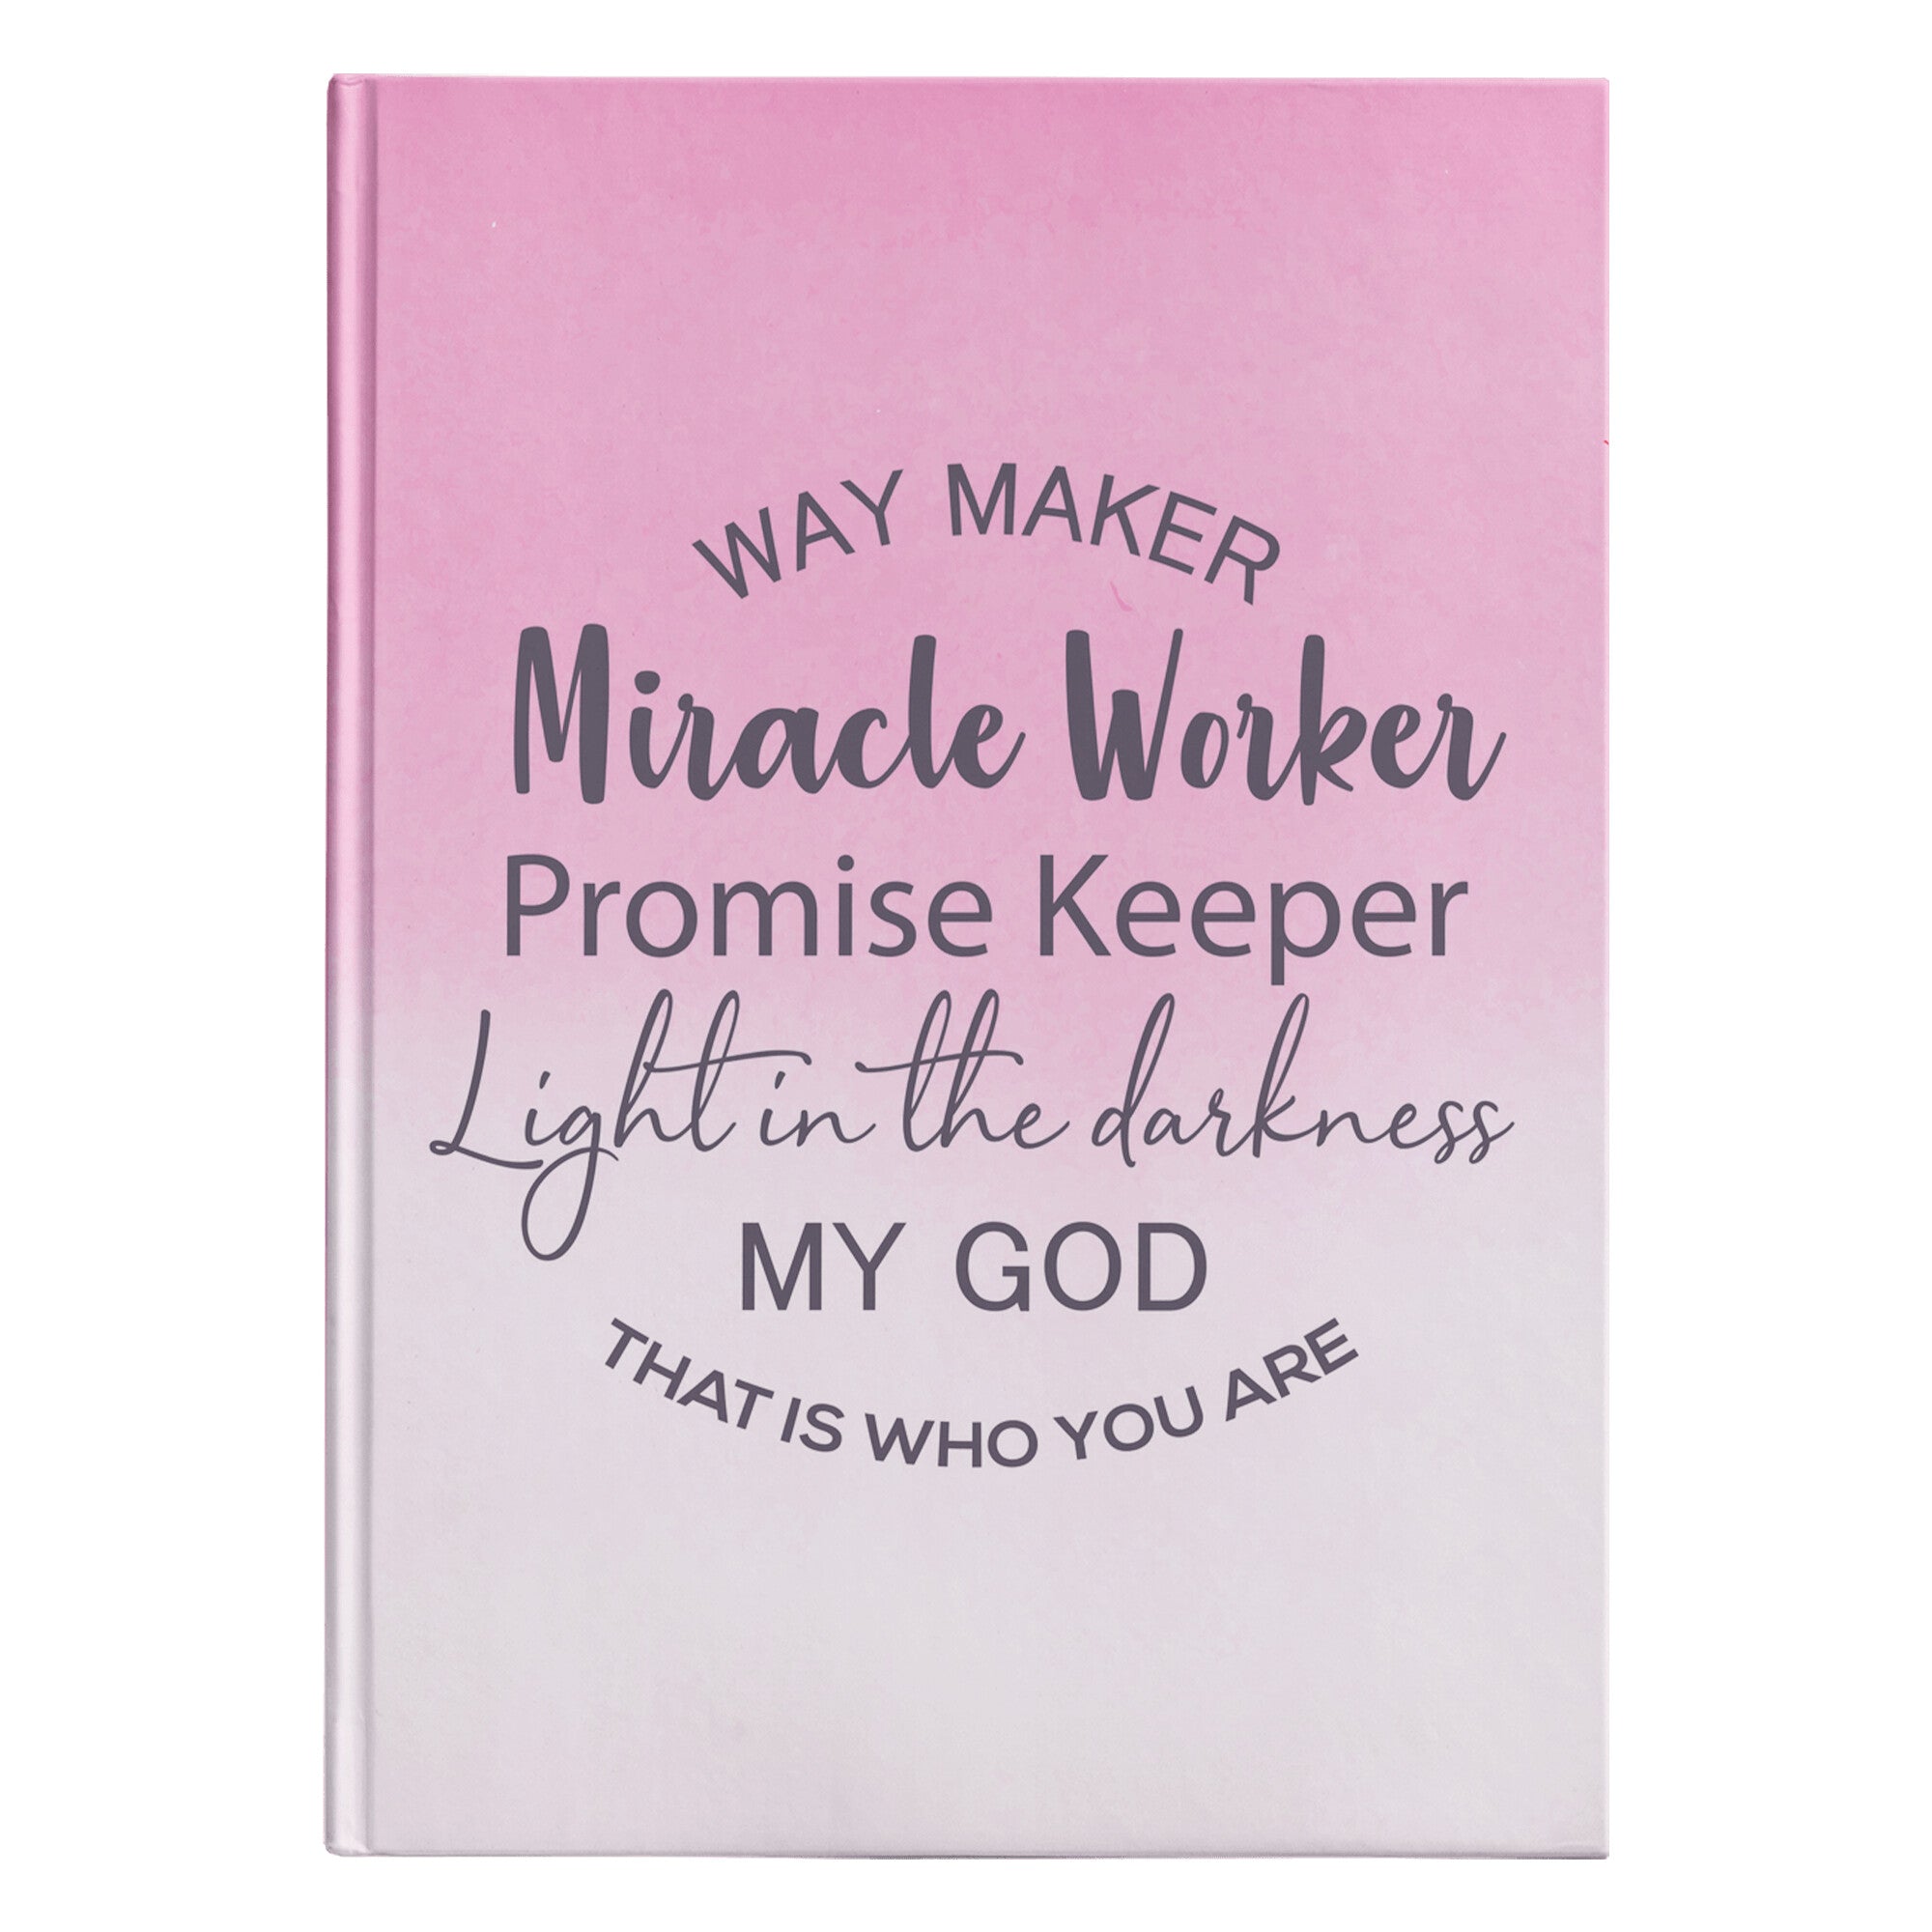 Way Maker Miracle Worker Journal